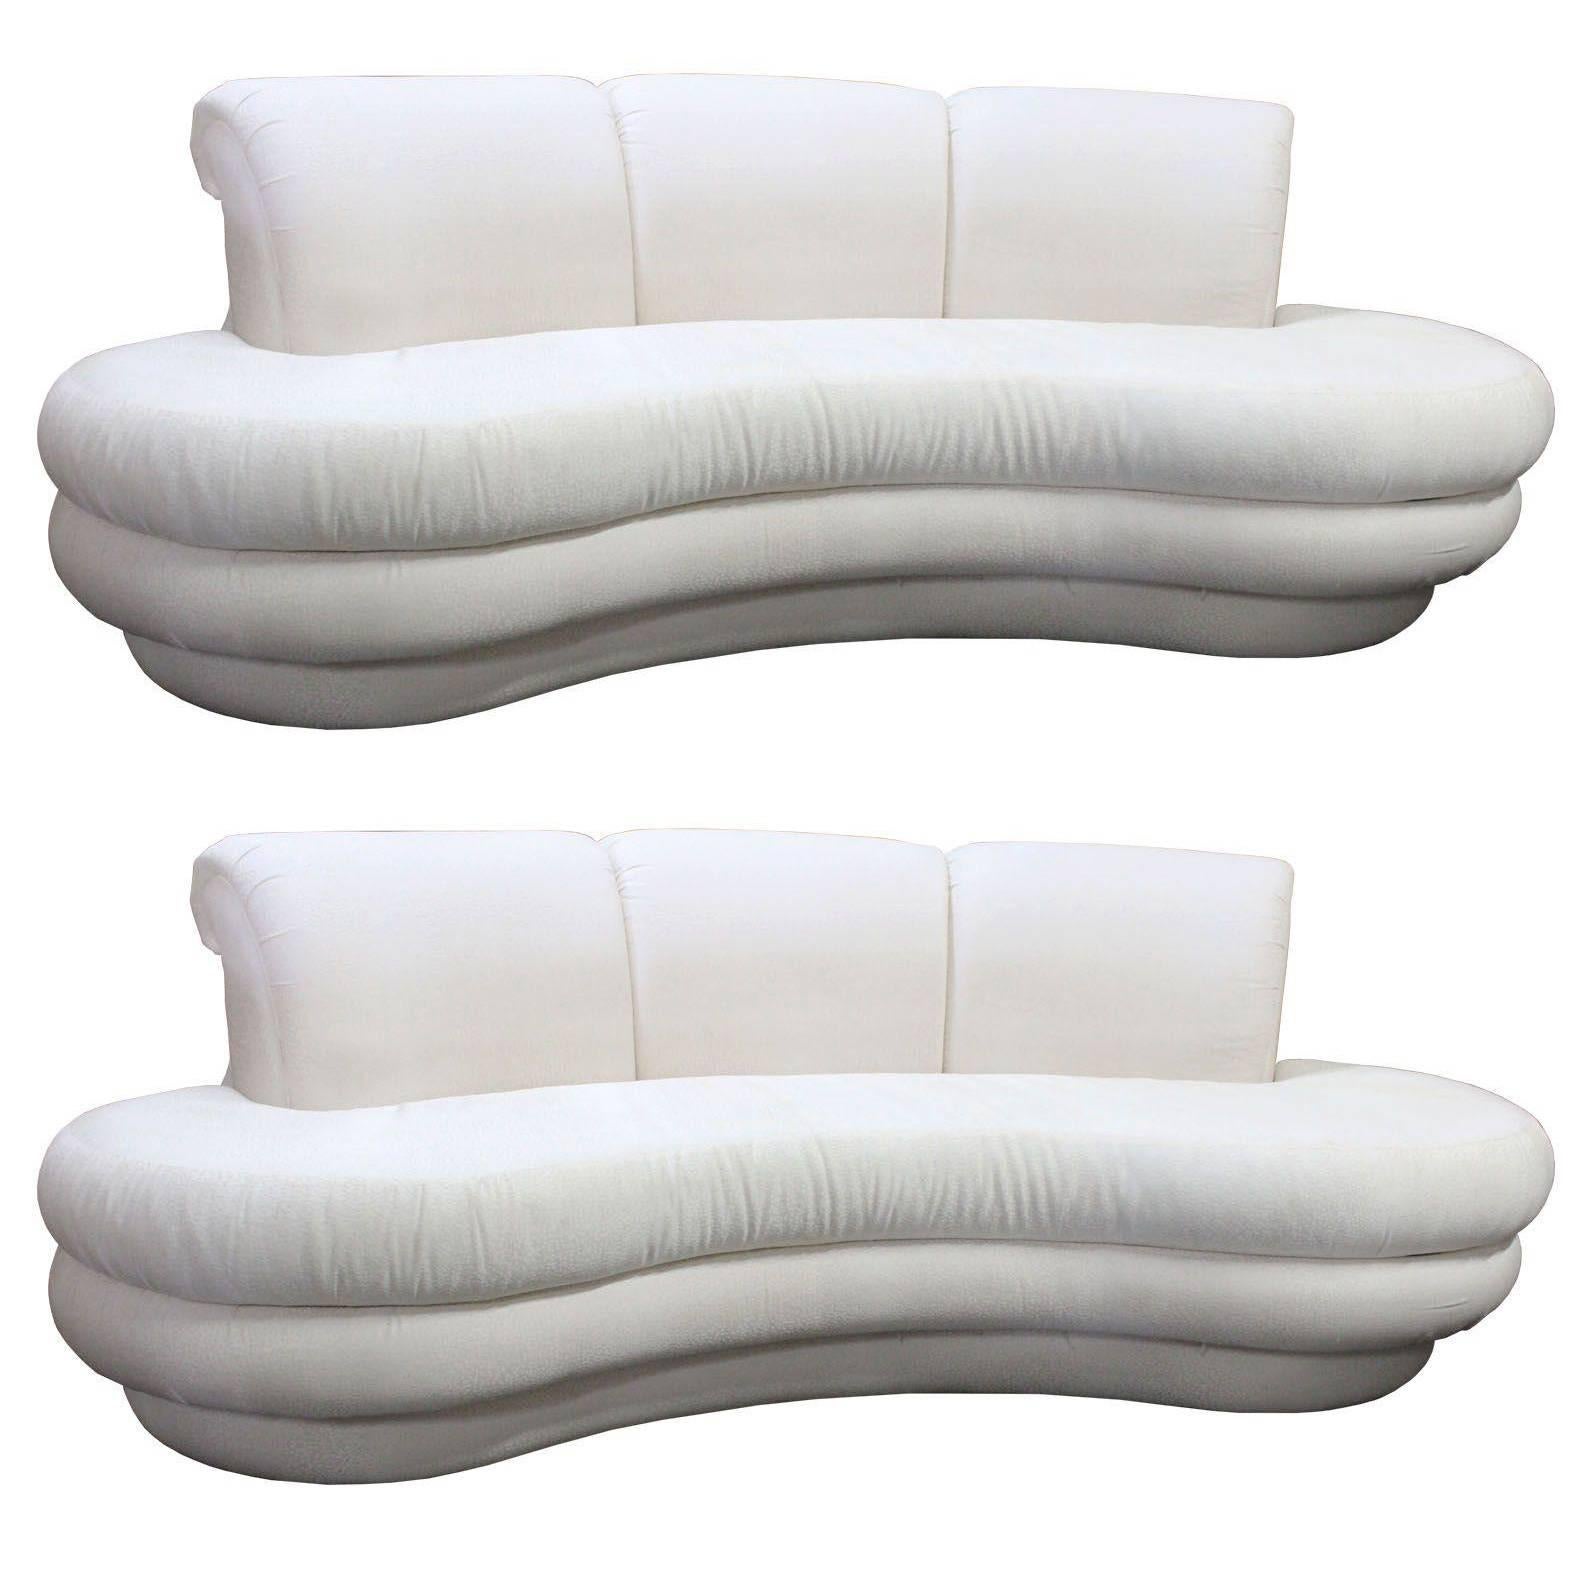 Pair or Single Vintage Adrian Pearsall Kidney Cloud Curved Sofas